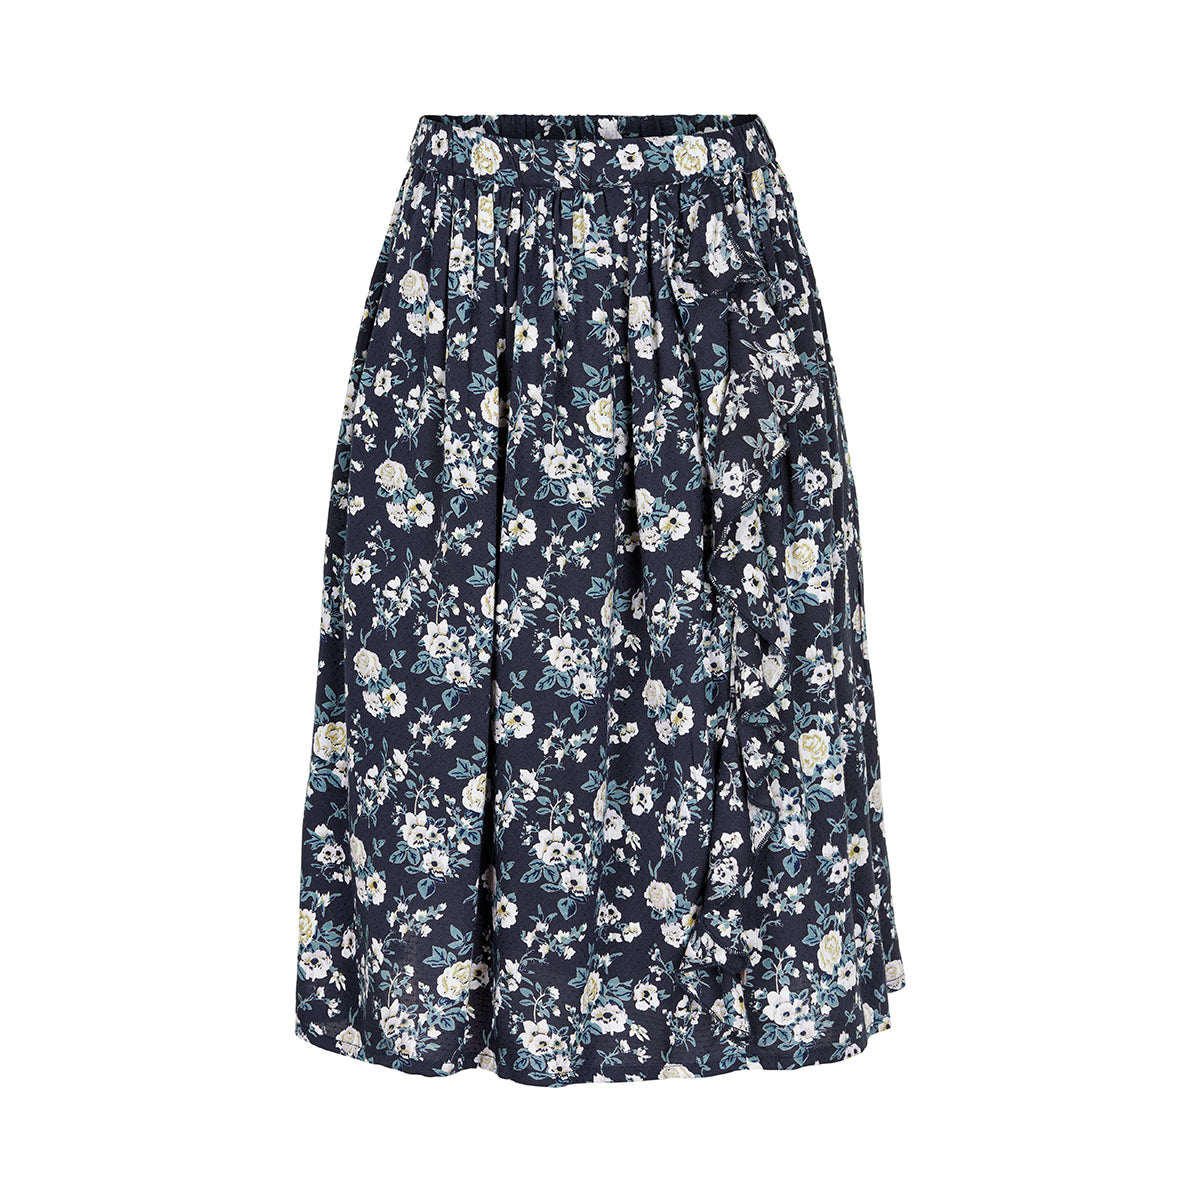 Creamie - Skirt Rose (821548) - Total Eclipse